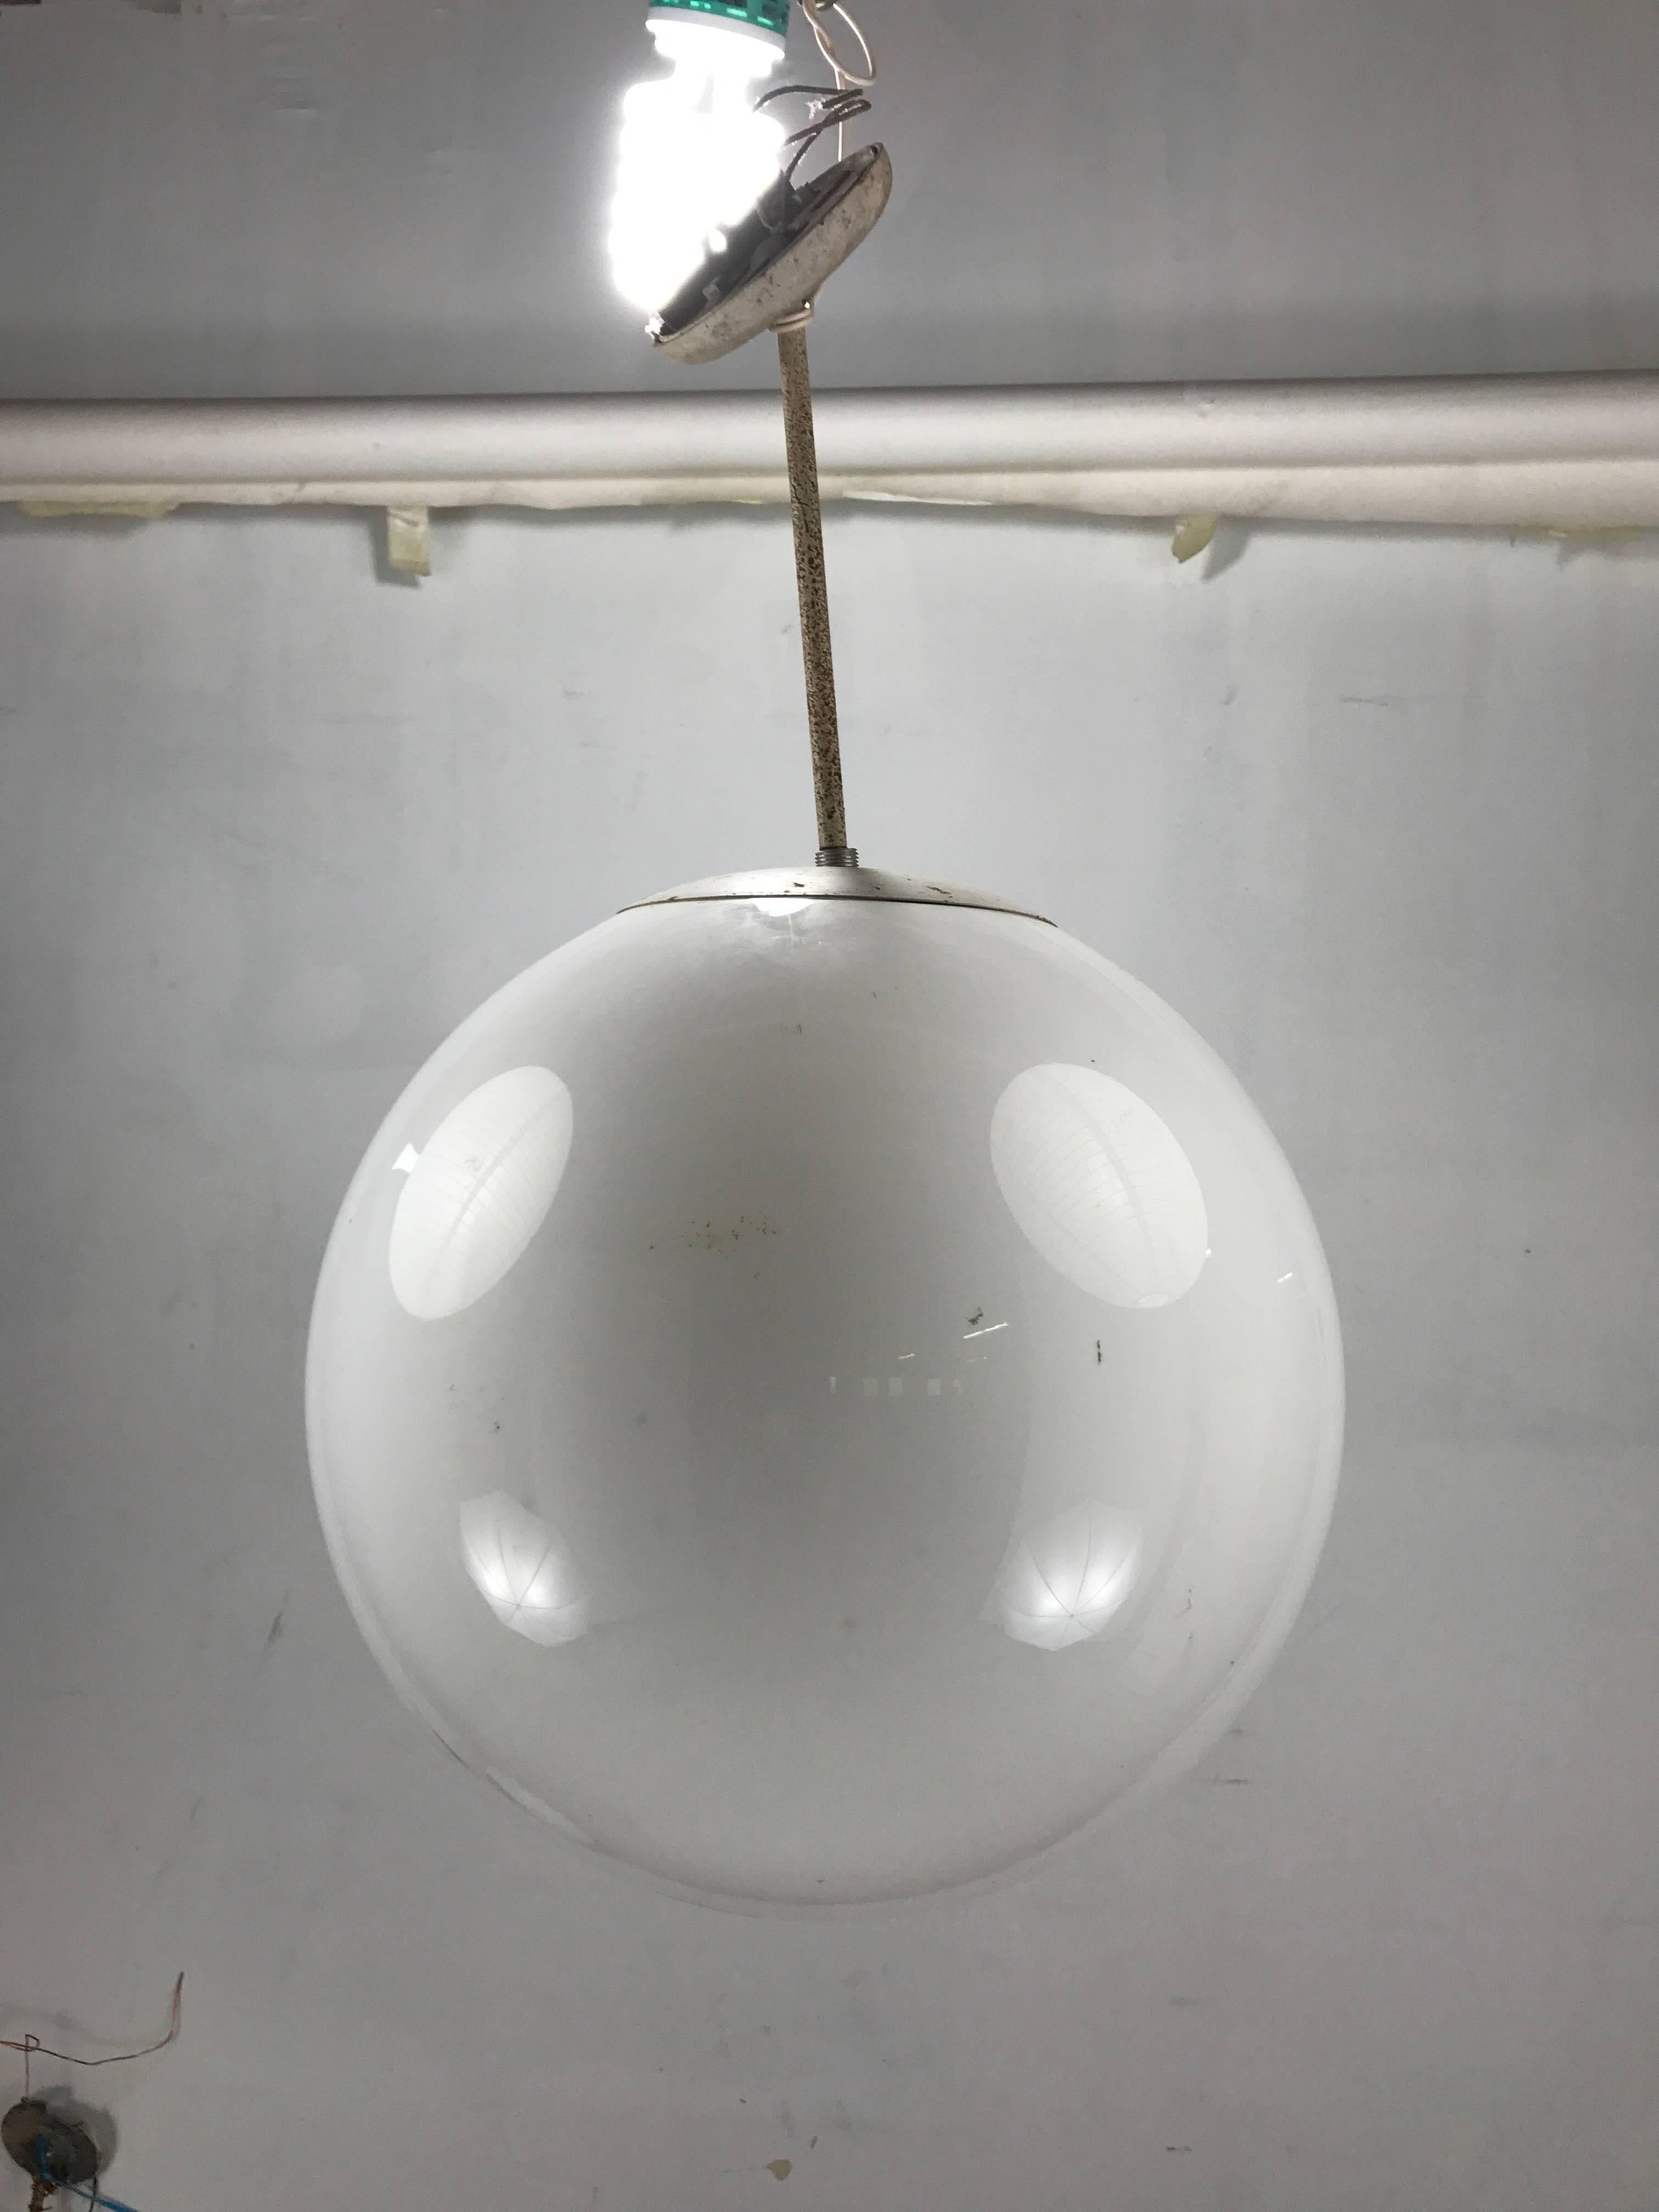 Classic set of opaque white glass globes. Unusual 18-inch diameter. Retain original standards and fitters in need of restoration.